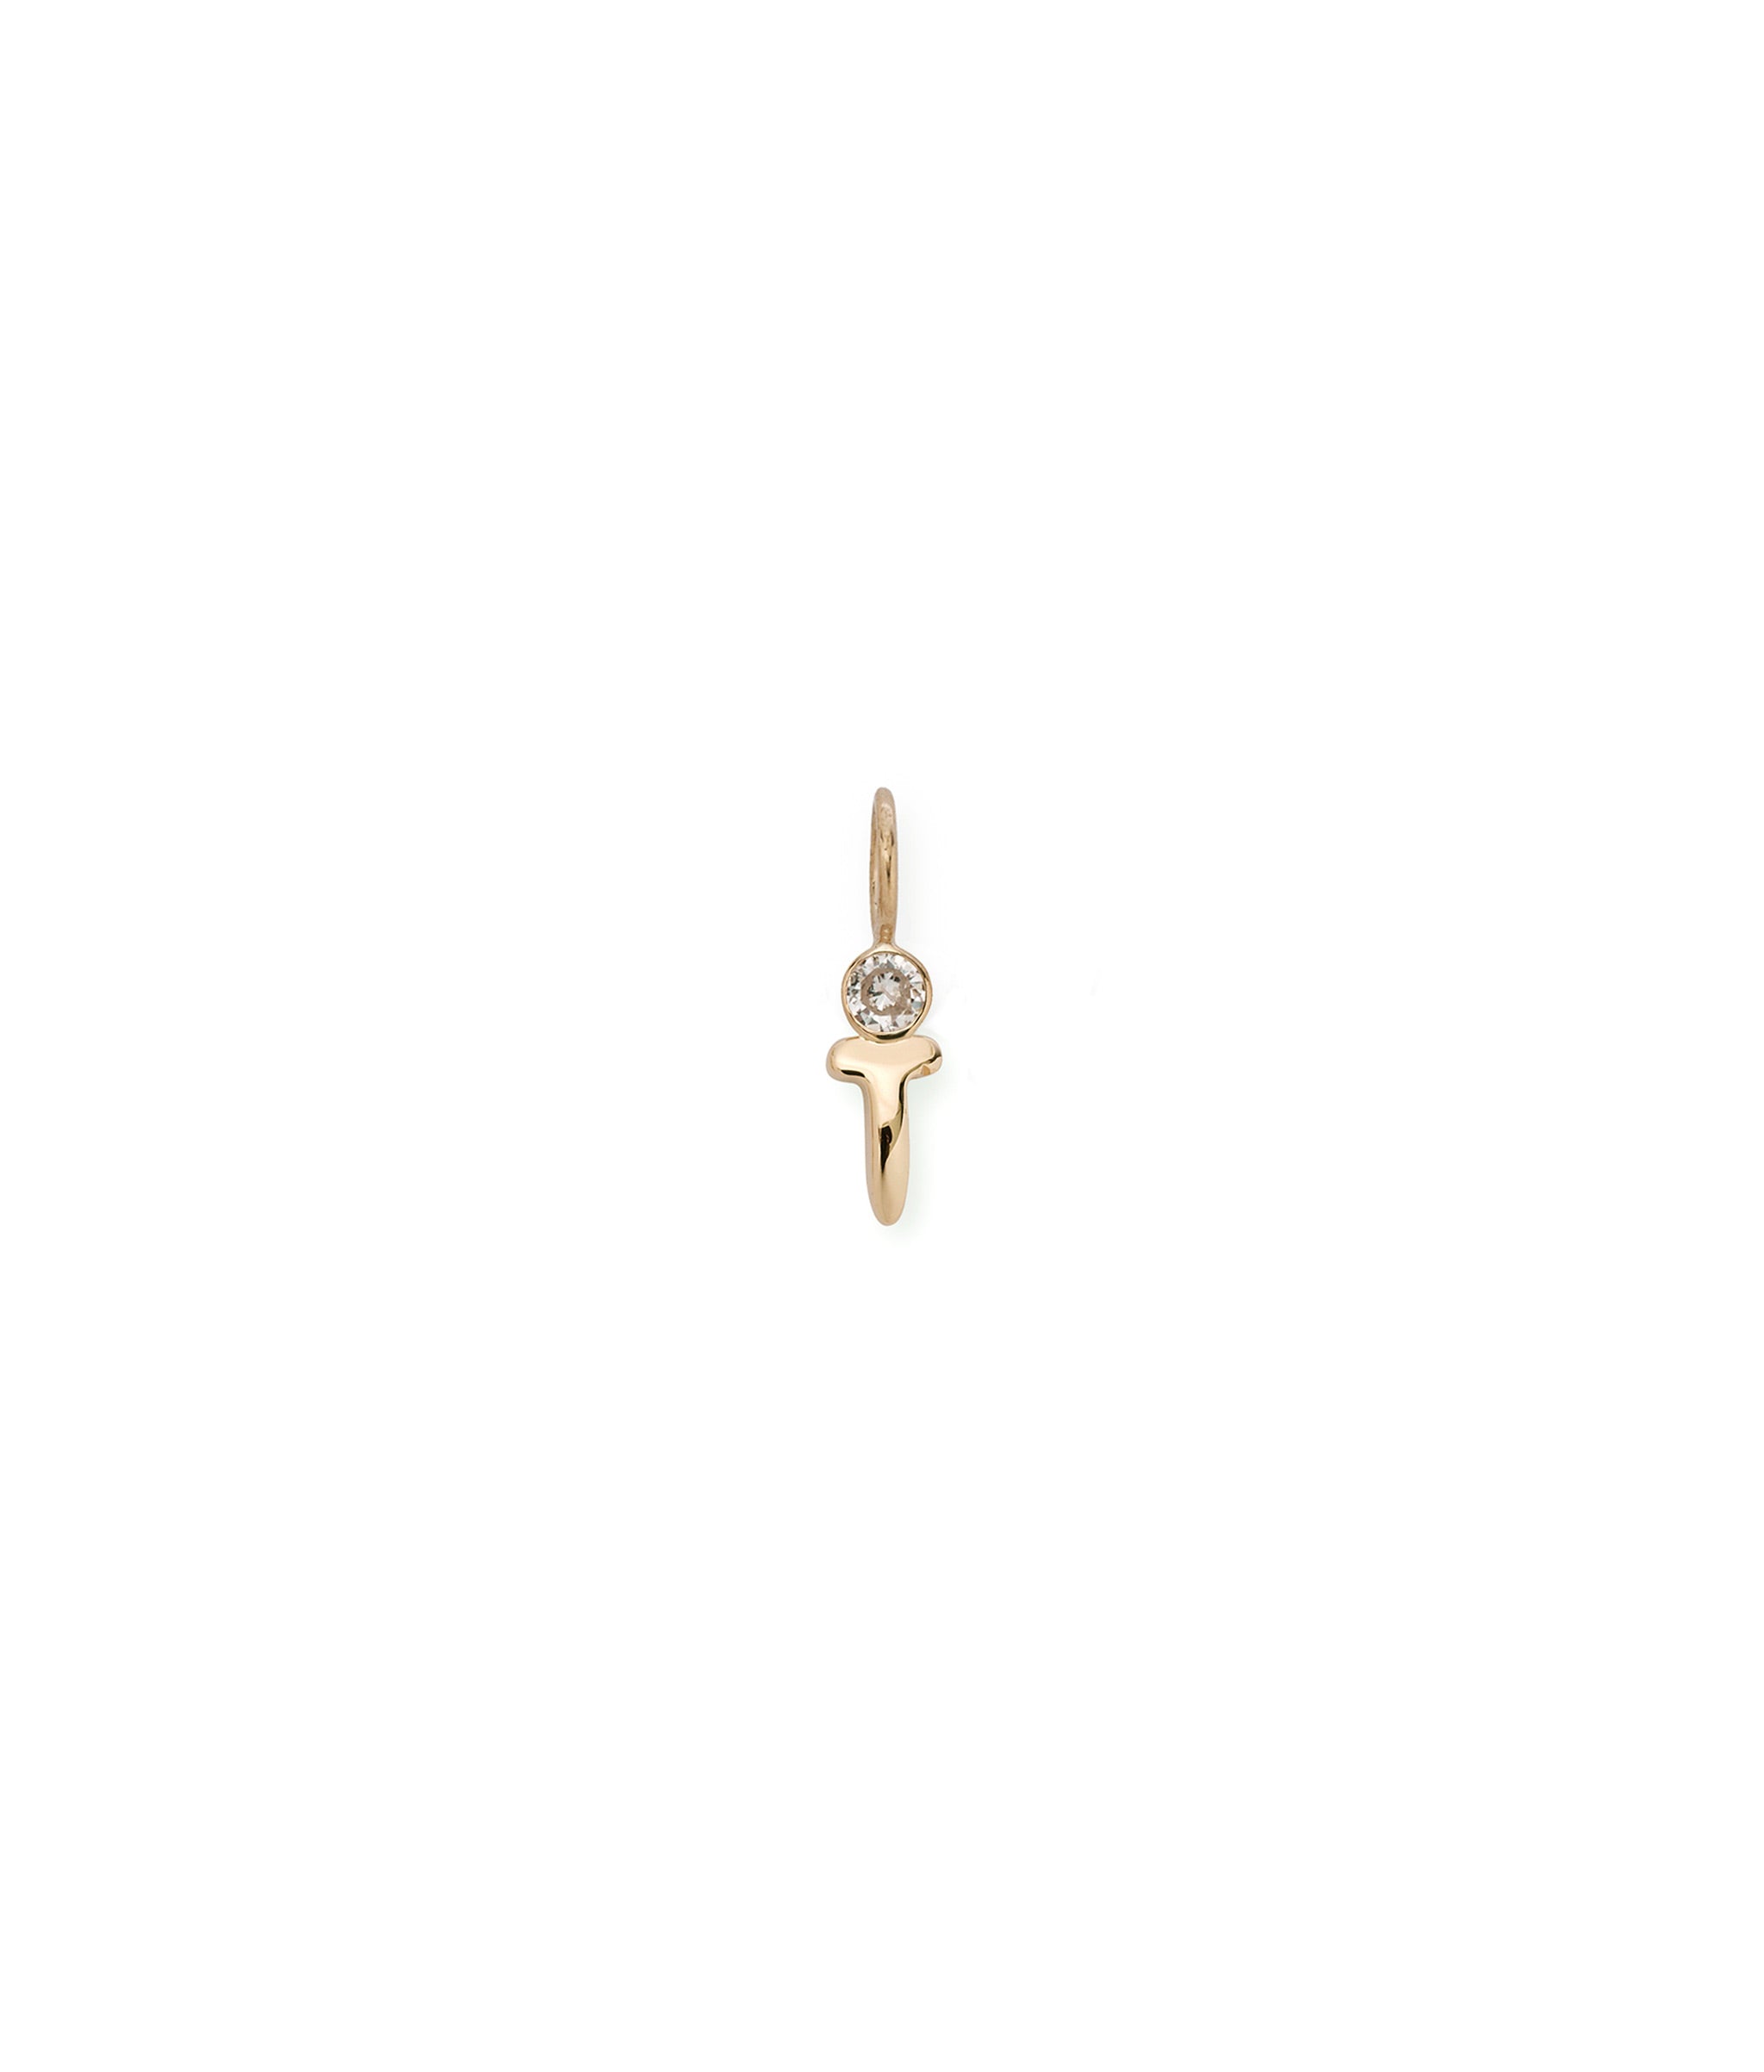 Alphabet Soup "T" Charm. Puffy mini 14k gold letter "T" charm with round diamond accent.